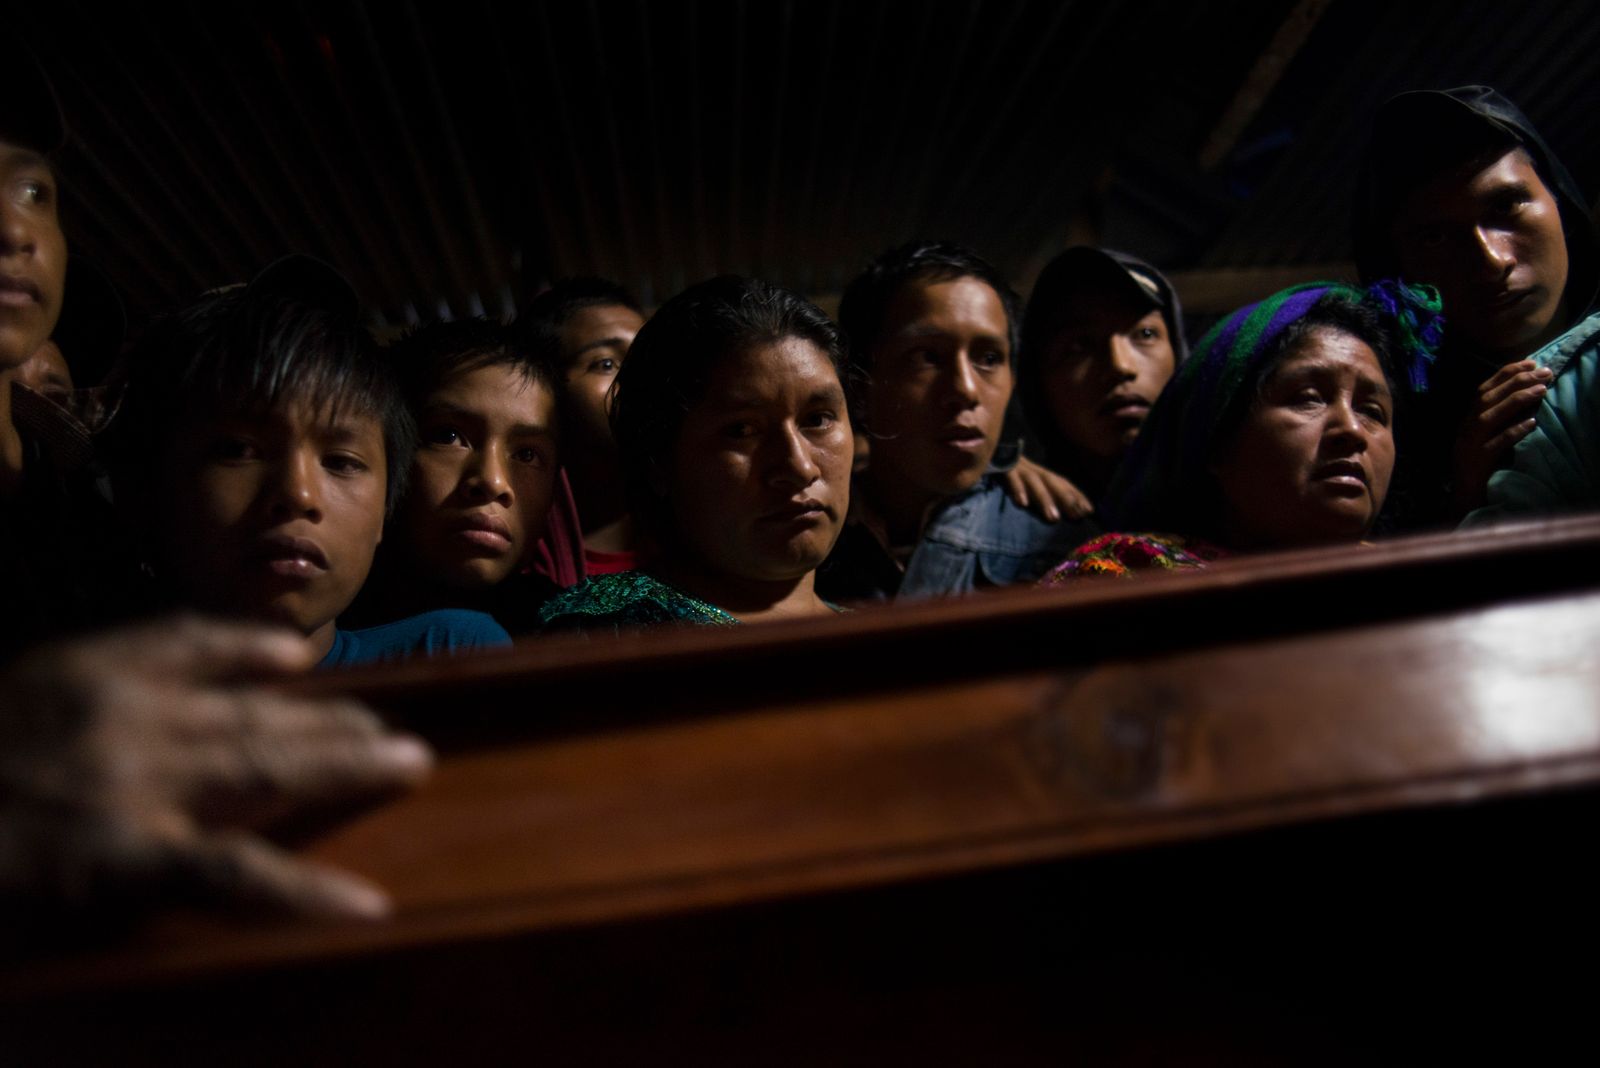 © Daniele Volpe - Image from the Ixil Genocide photography project